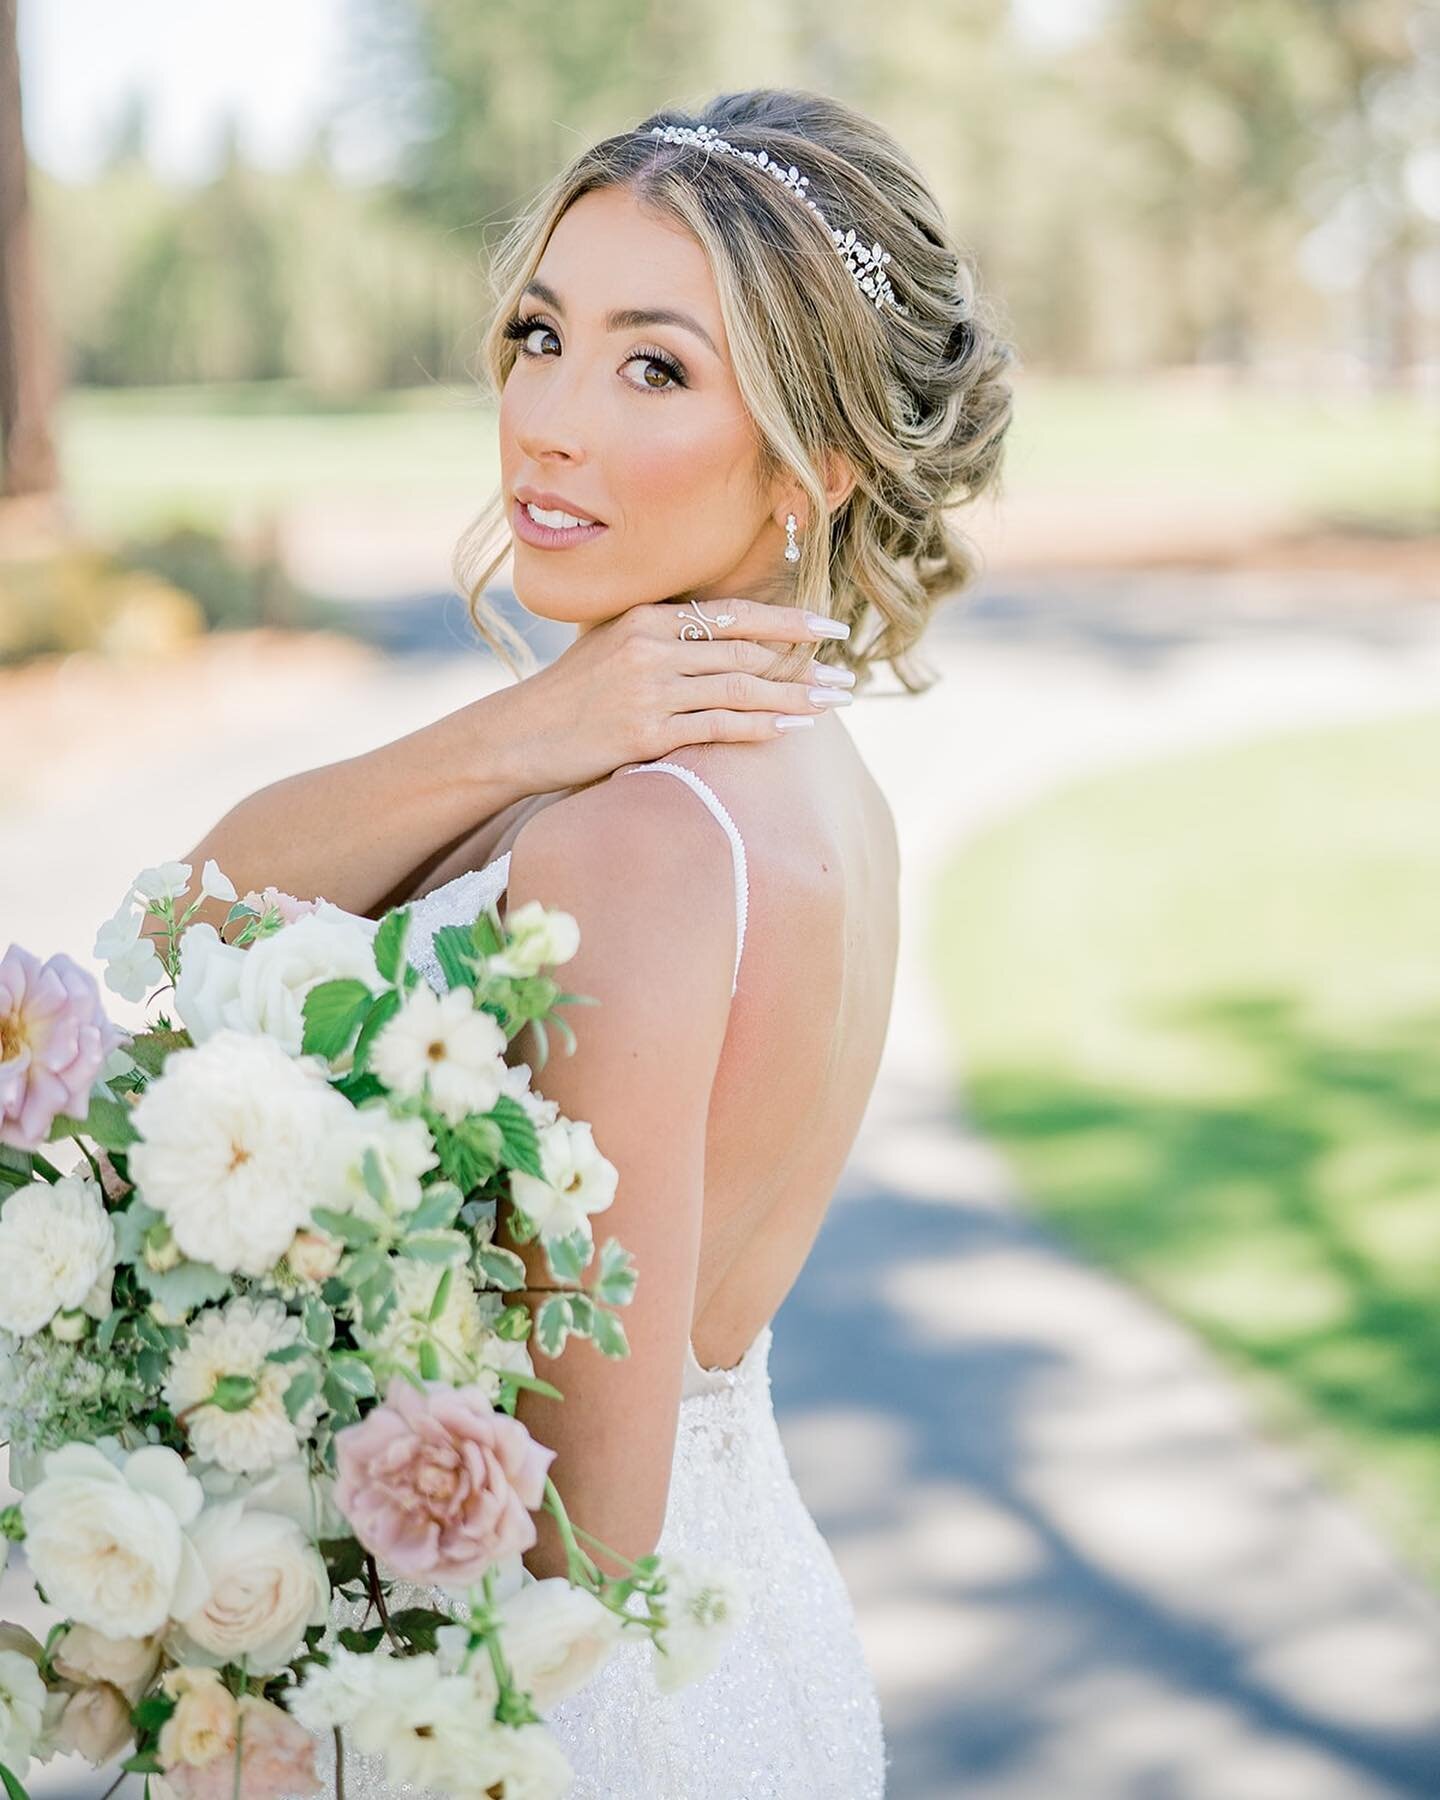 The best time with Nikki and her girls! Isn&rsquo;t she gorgeous 💗

Planner: @forgetmeknotevents
Photographer: @mandyfordphotography
Videographers: @daxvictorinofilms
Venue: @edgewoodtahoe
Florist: @twinefloralco
DJ: @brianhessmusic
Makeup: @vanessa